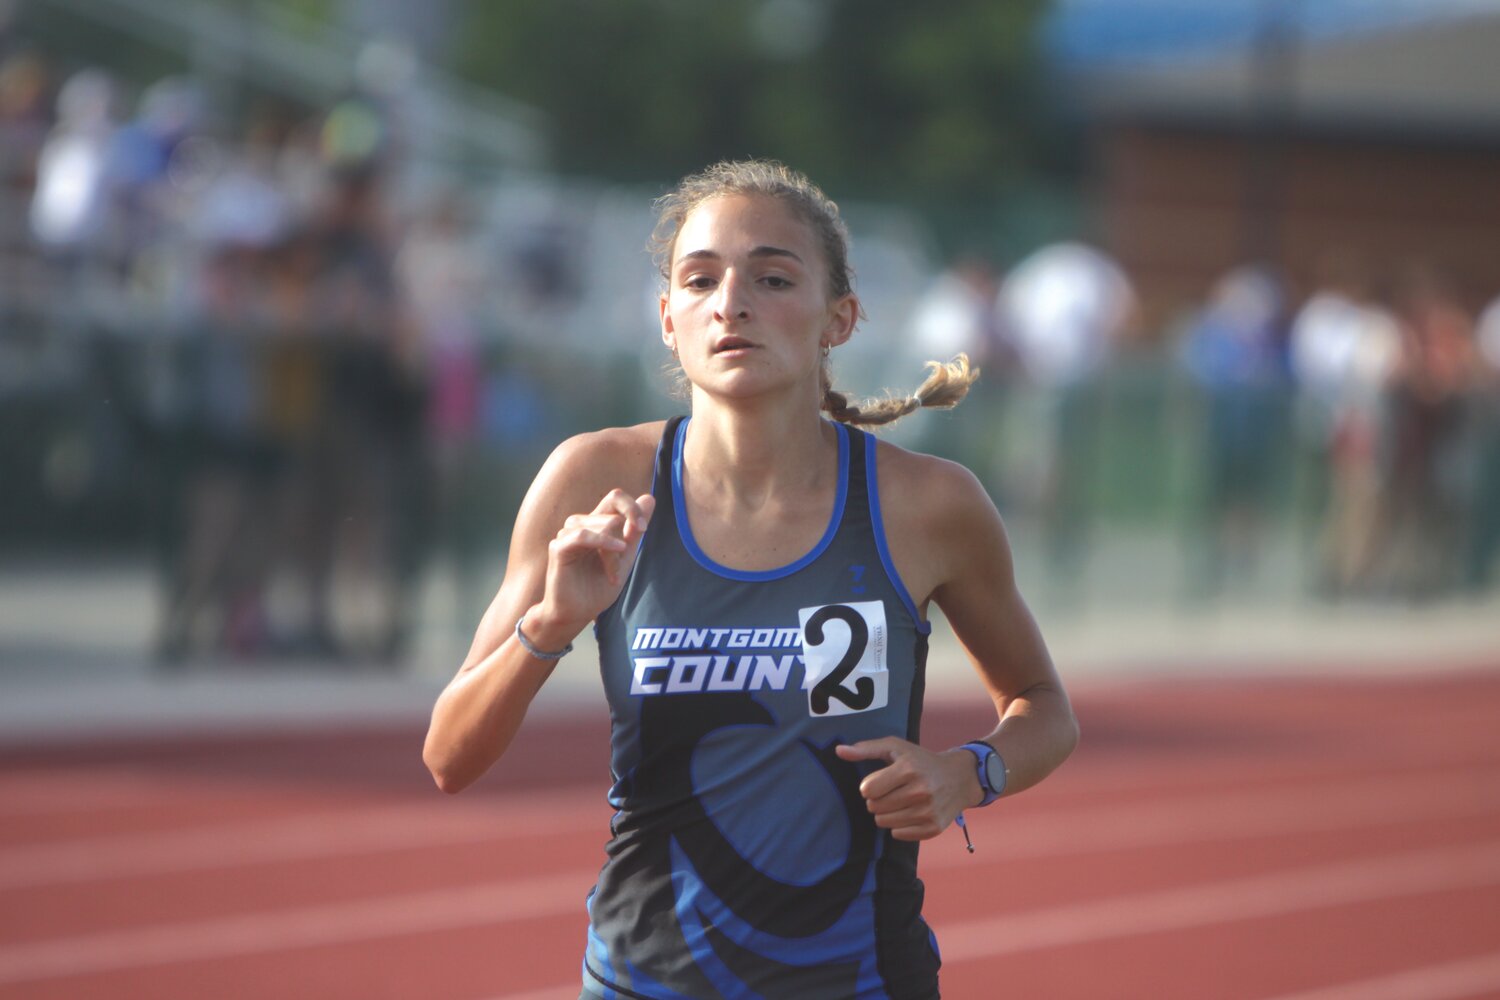 Montgomery County senior Lyric Ford competes in the 800 at the Class 3, District 4 championship meet at North Point High School on May 13. Ford won the 800 and 1,600 and helped the 3,200-meter relay team place second.